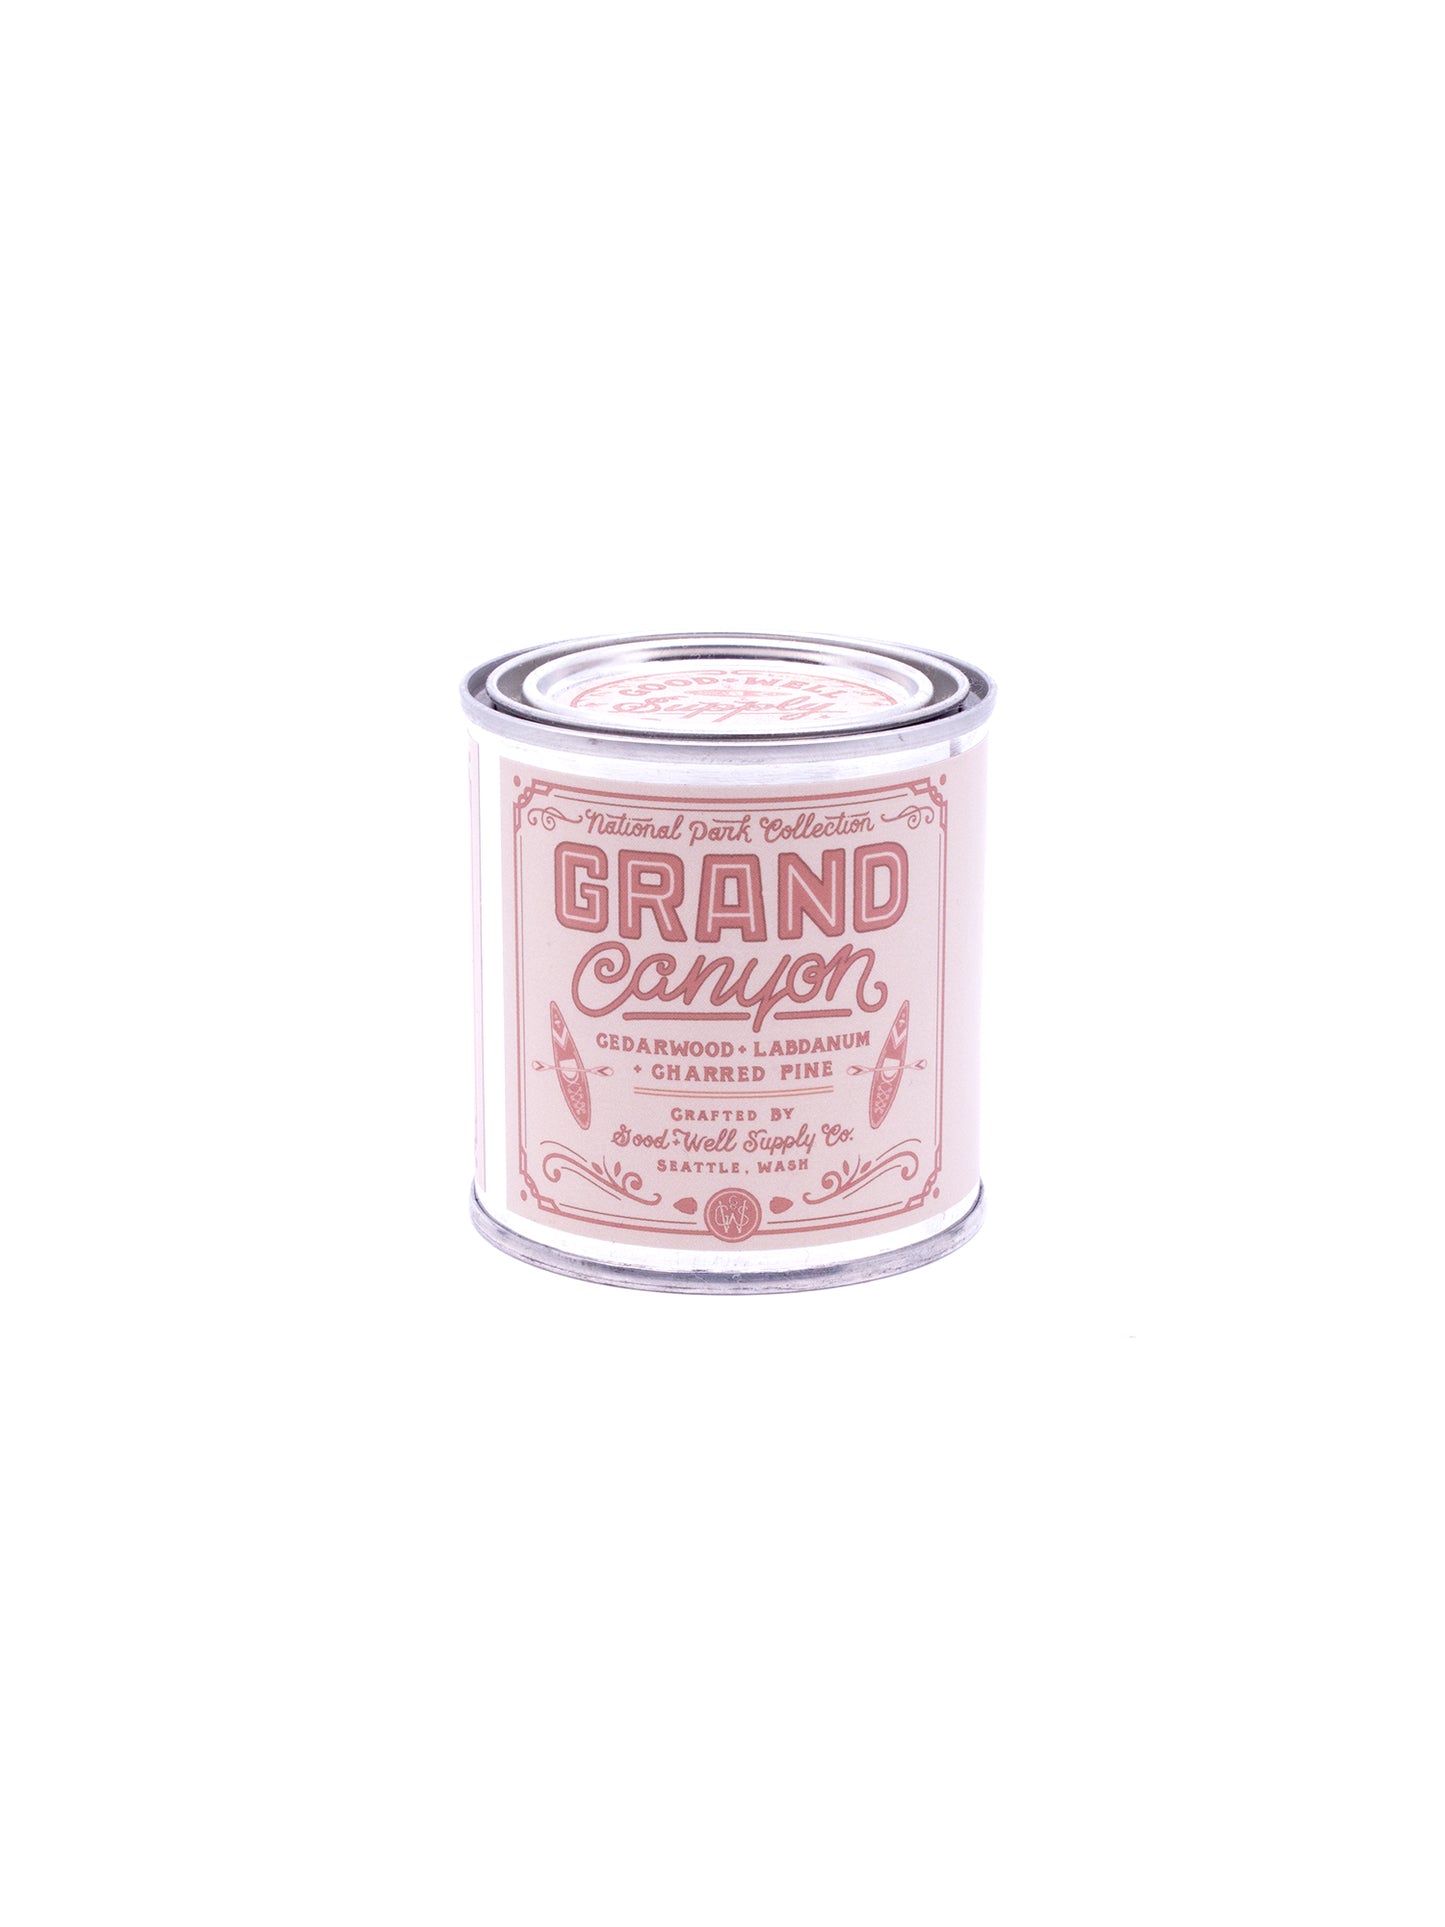 Good and Well Supply Co. Half Pint National Park Candle Grand Canyon